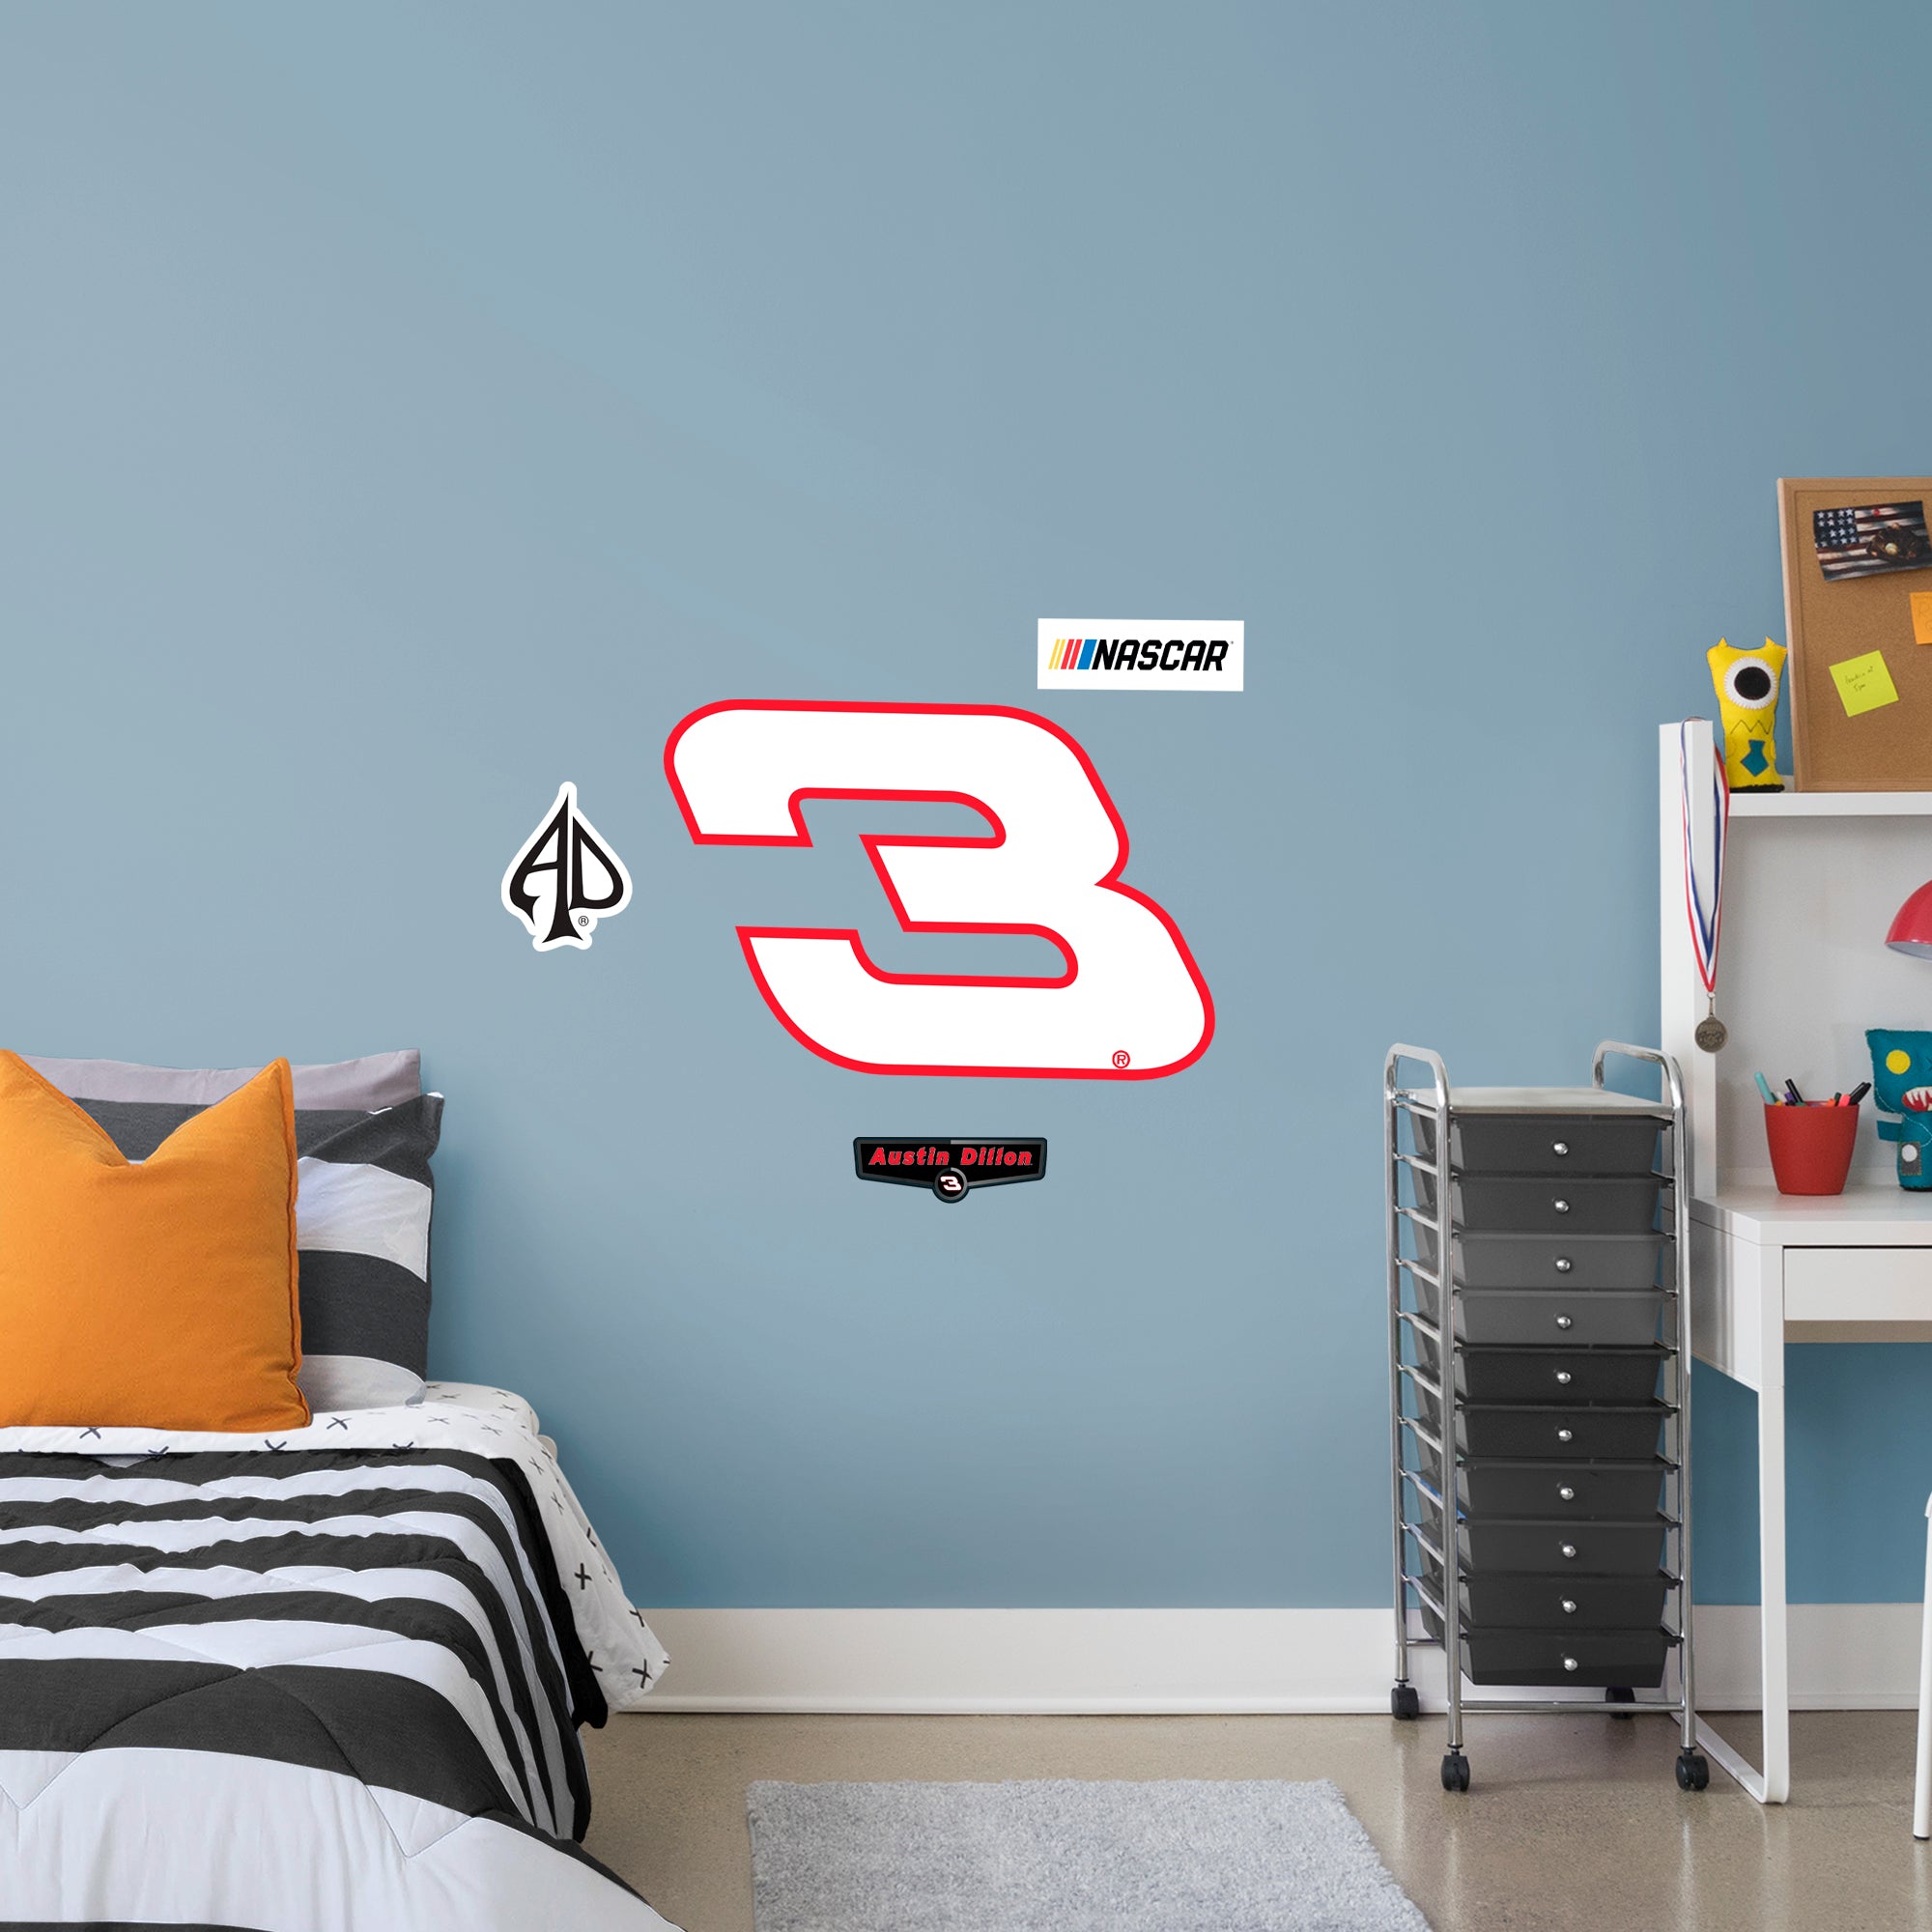 Austin Dillon 2021 #3 Logo - Officially Licensed NASCAR Removable Wall Decal XL by Fathead | Vinyl